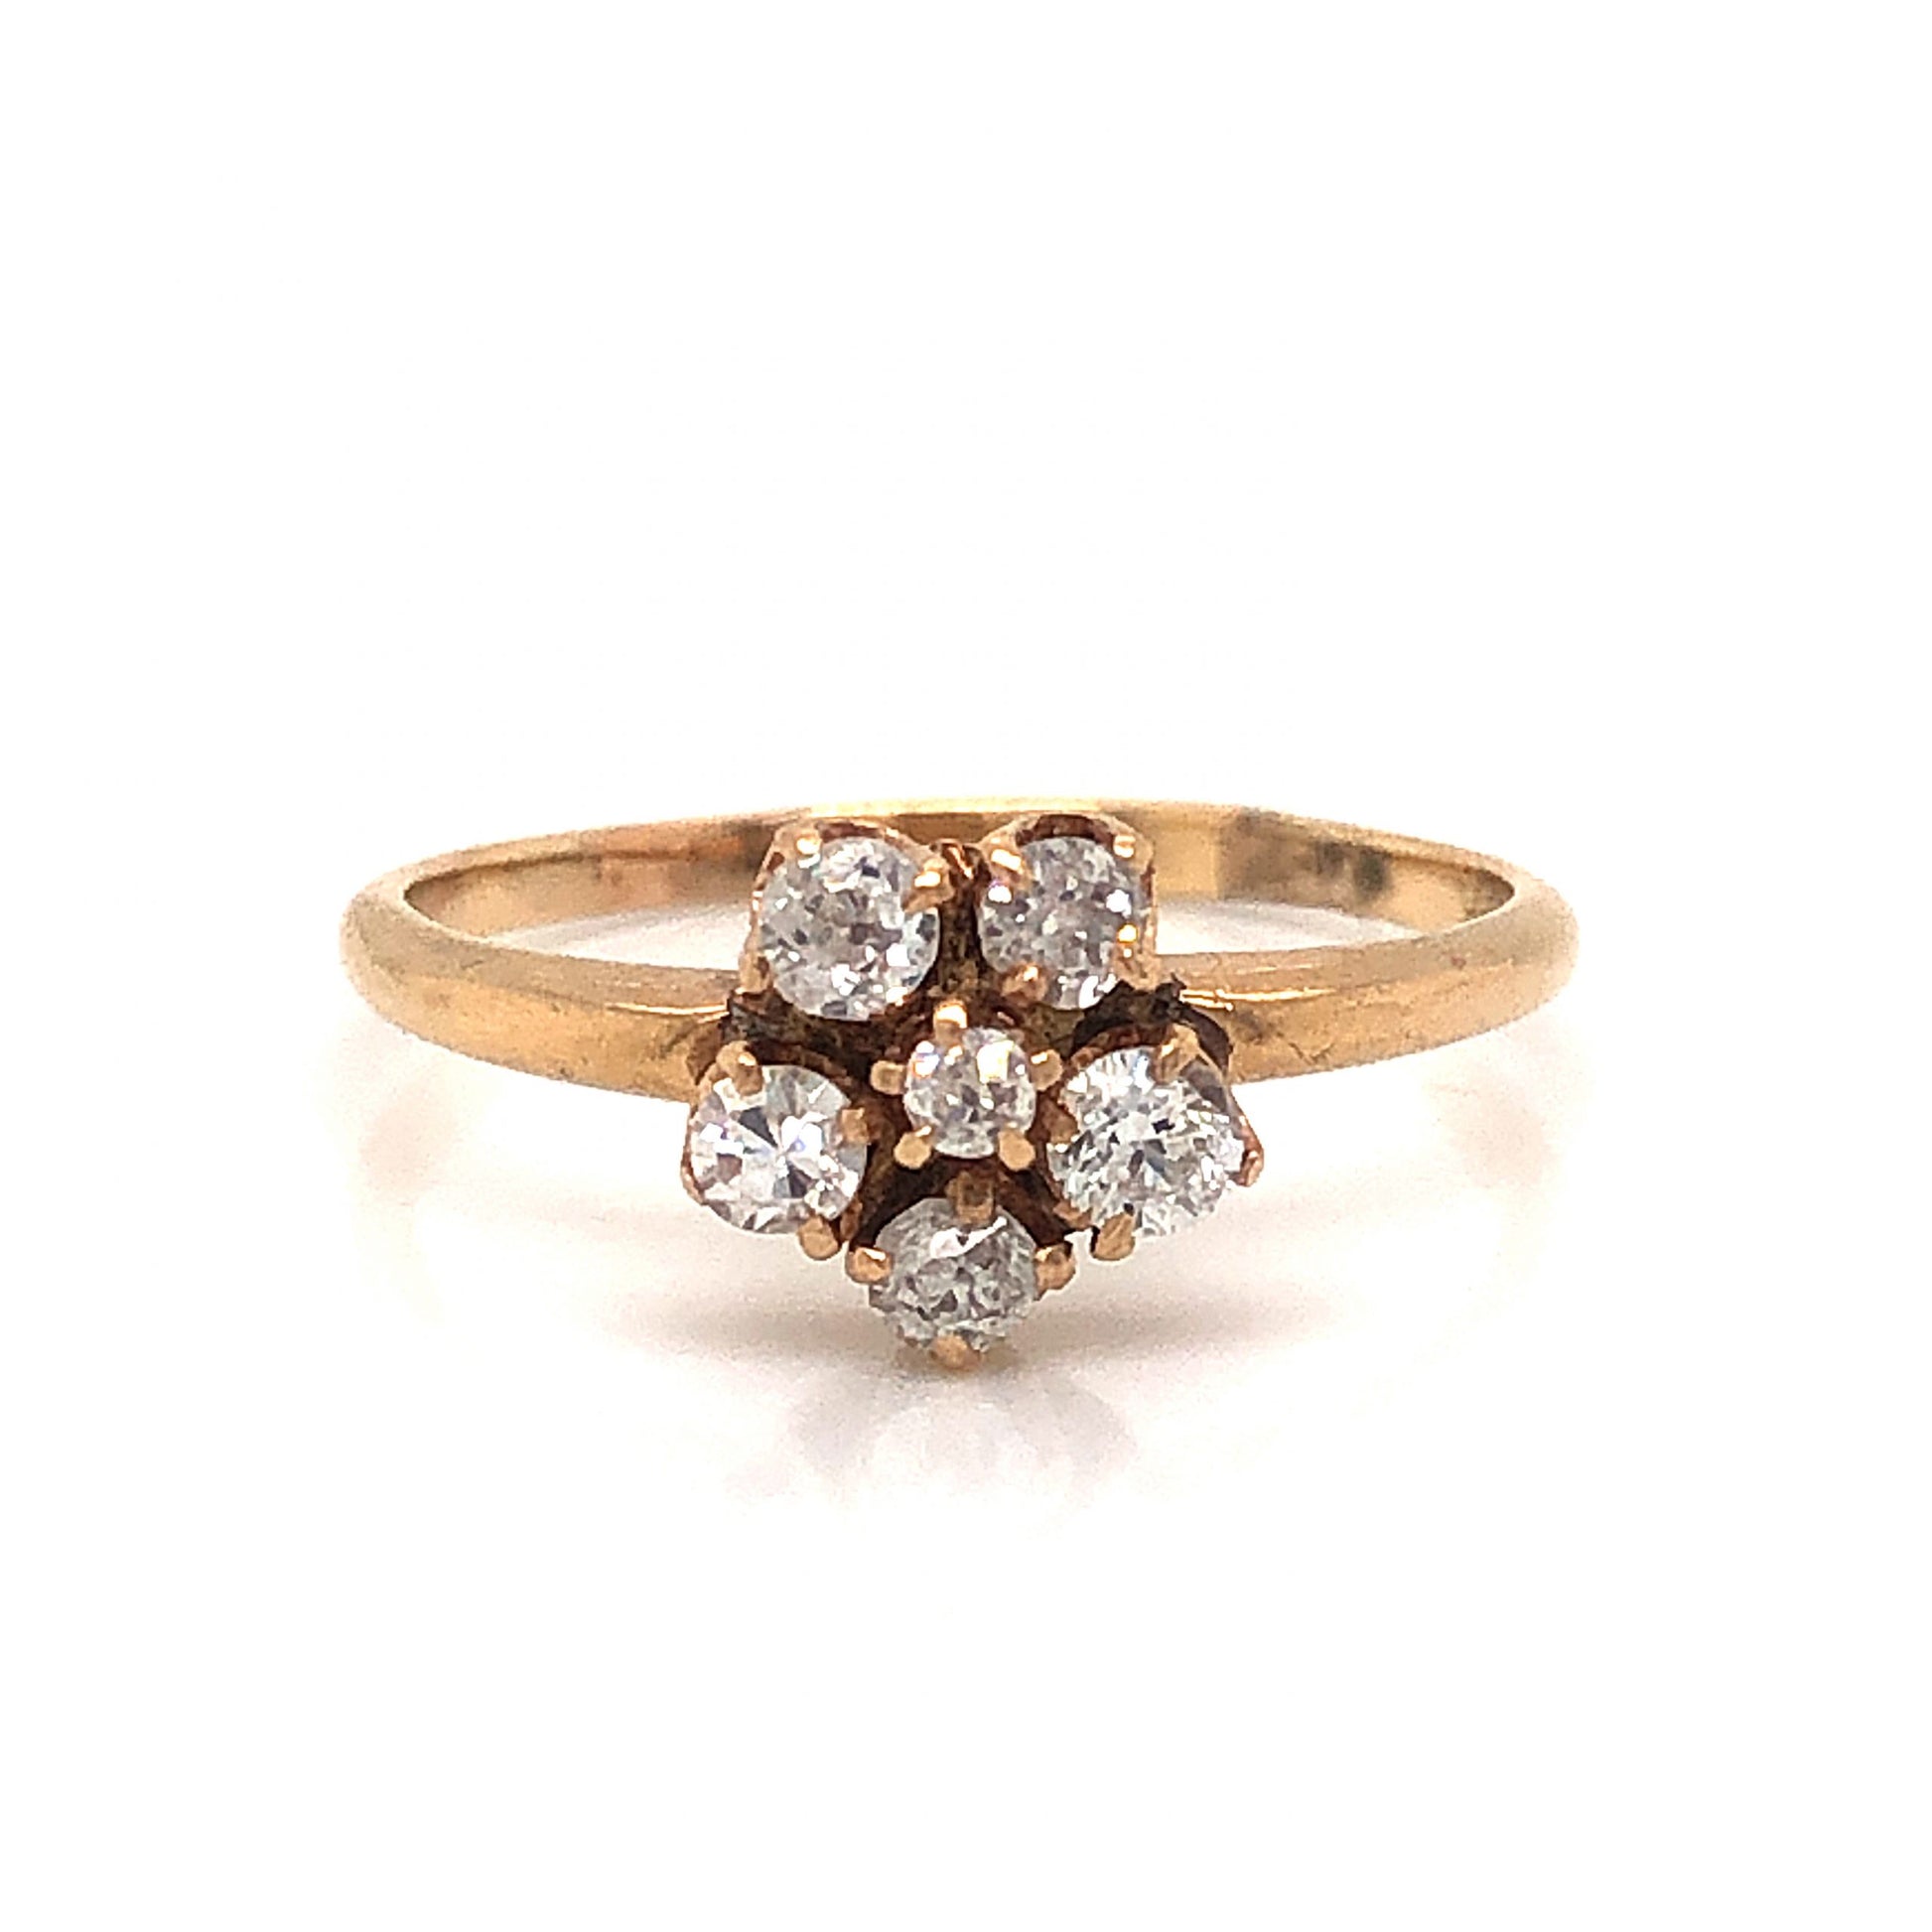 Dainty Victorian Diamond Cluster Engagement Ring in 14k Yellow Gold